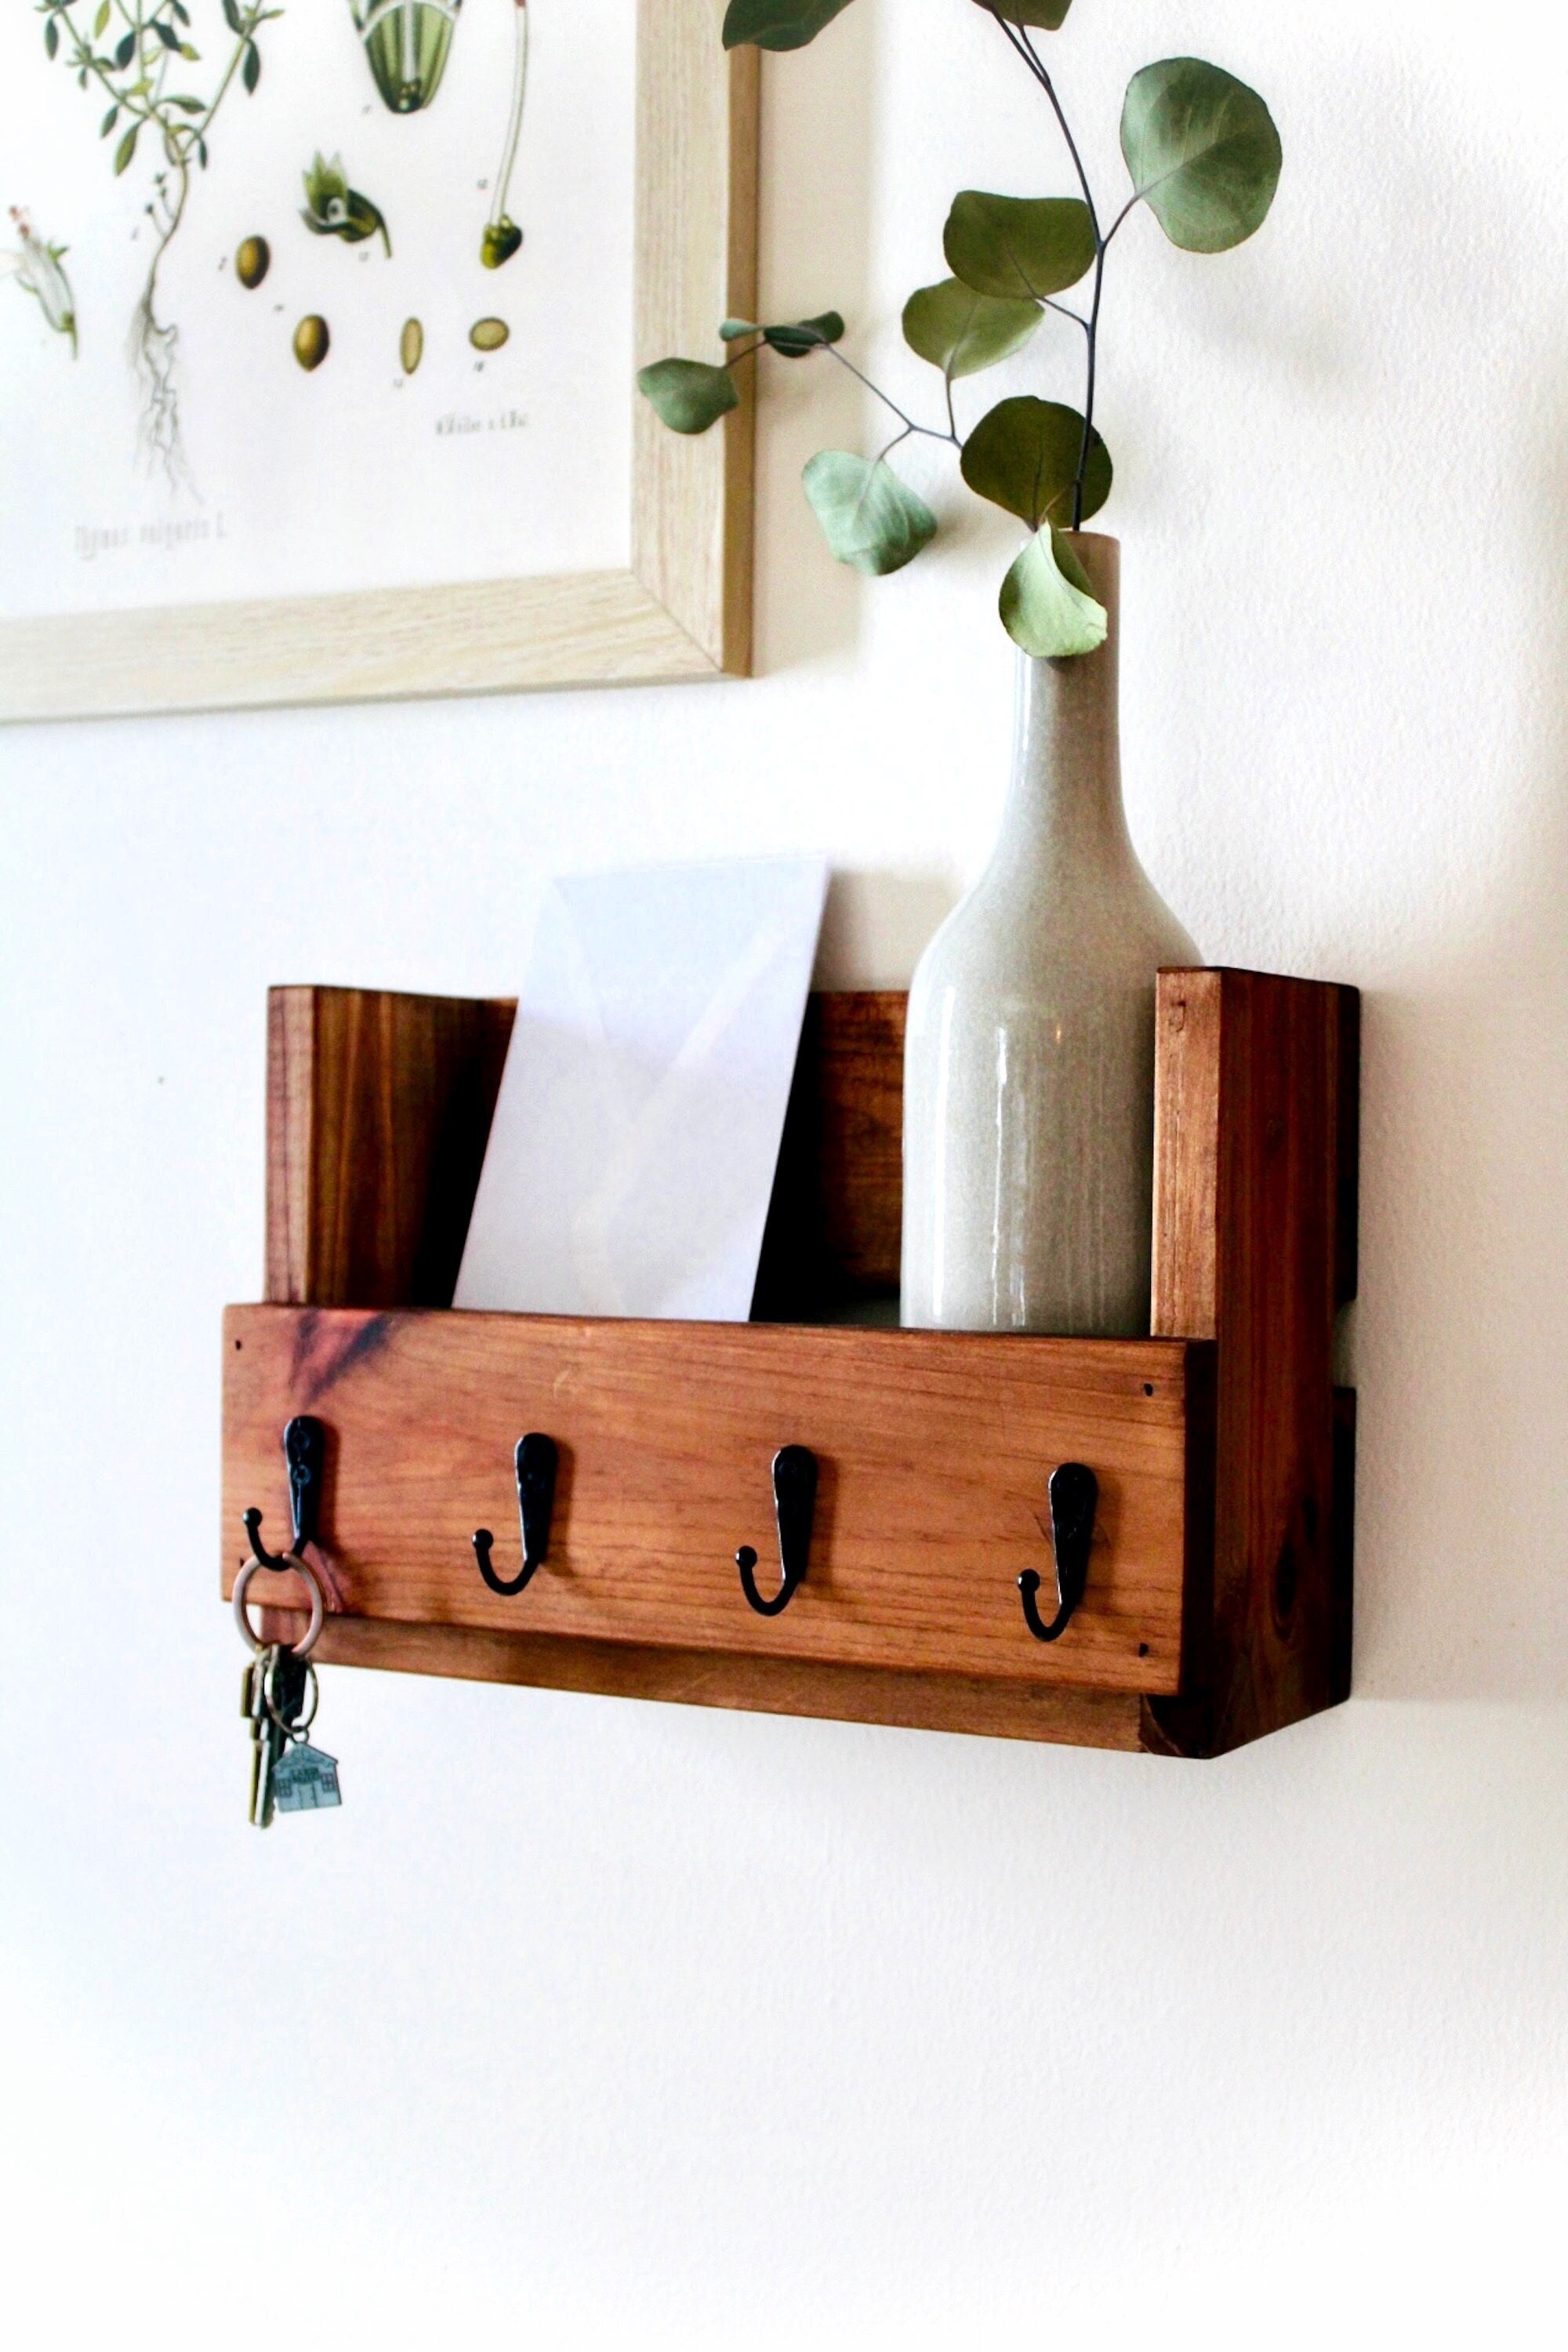 Key Holder for Wall With Basket Shelf, Cubby, Mail Organizer for